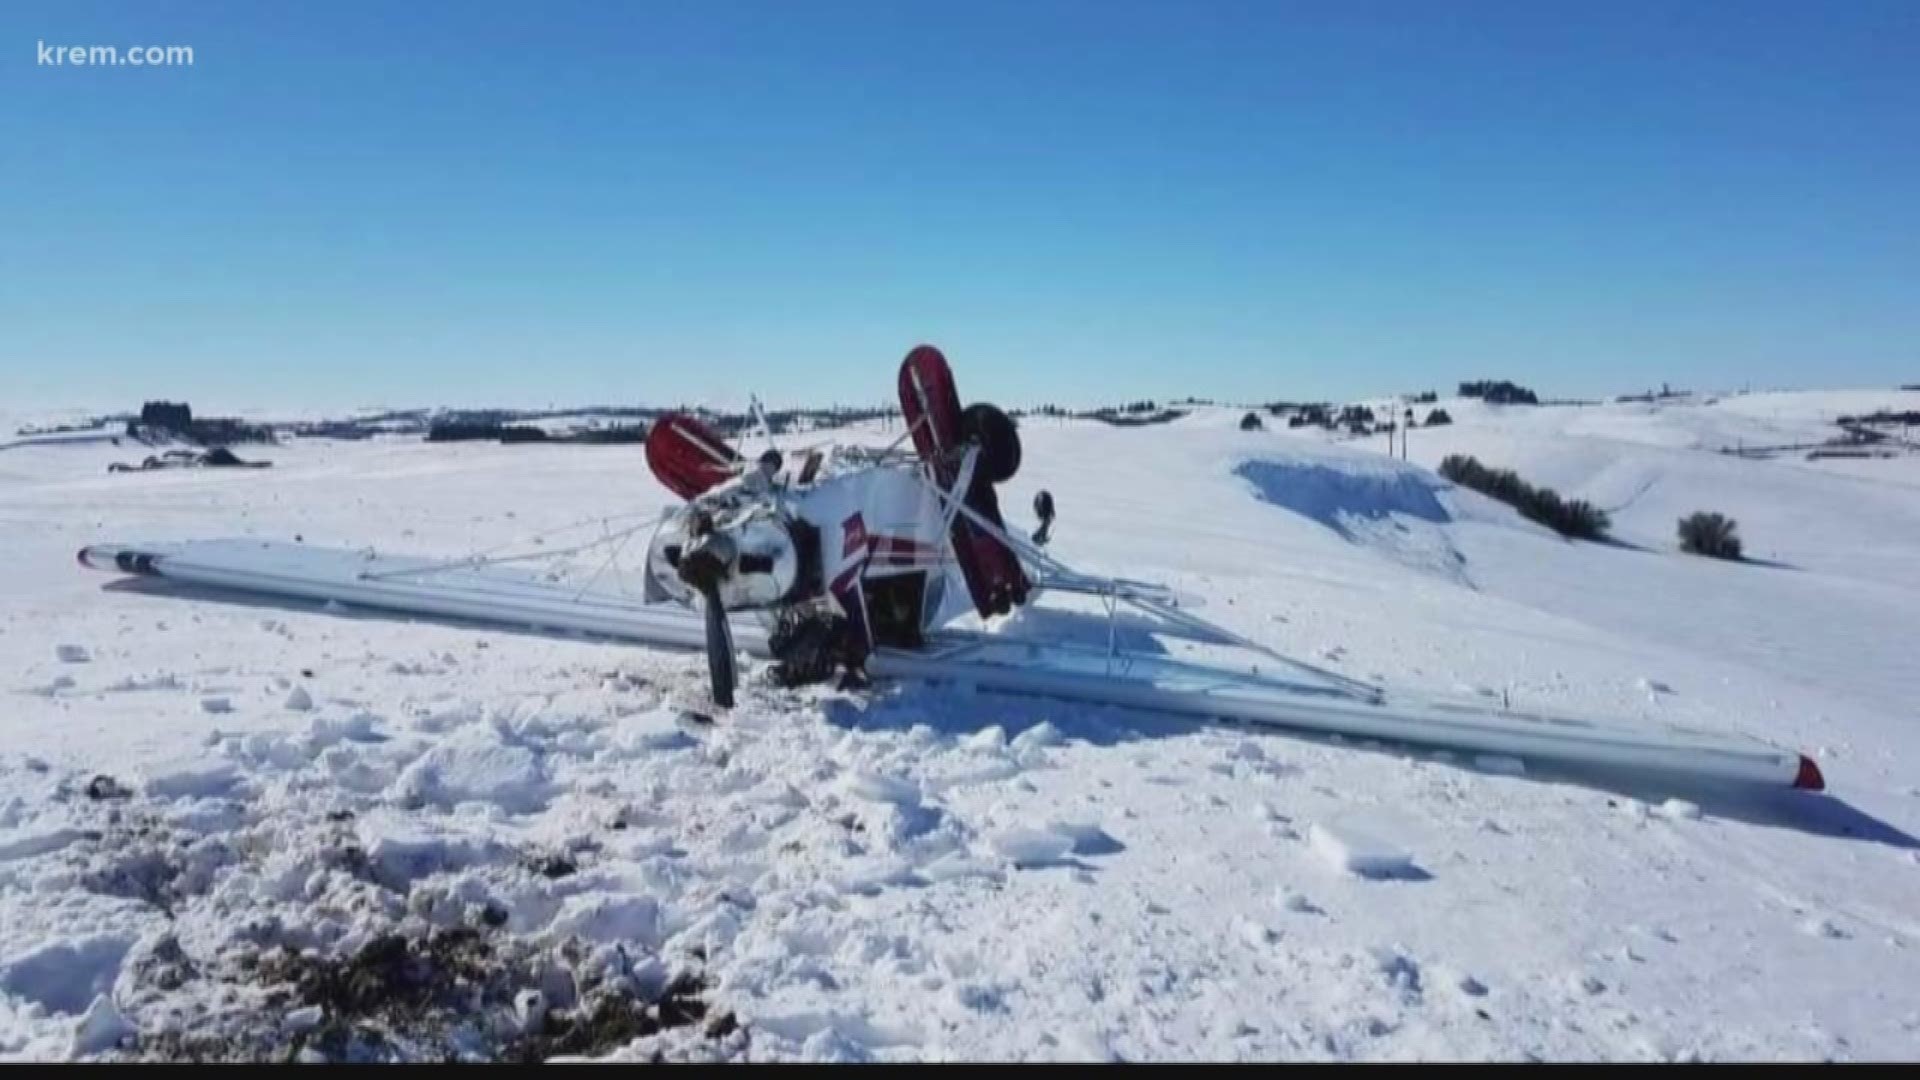 The Whitman Co. Sheriff's Office responded to the report shortly after 12 p.m. Initial reports indicated the pilot was practicing "touch-and-go" landings in a fields near the airport while piloting his 1964 Piper Super Cub aircraft.